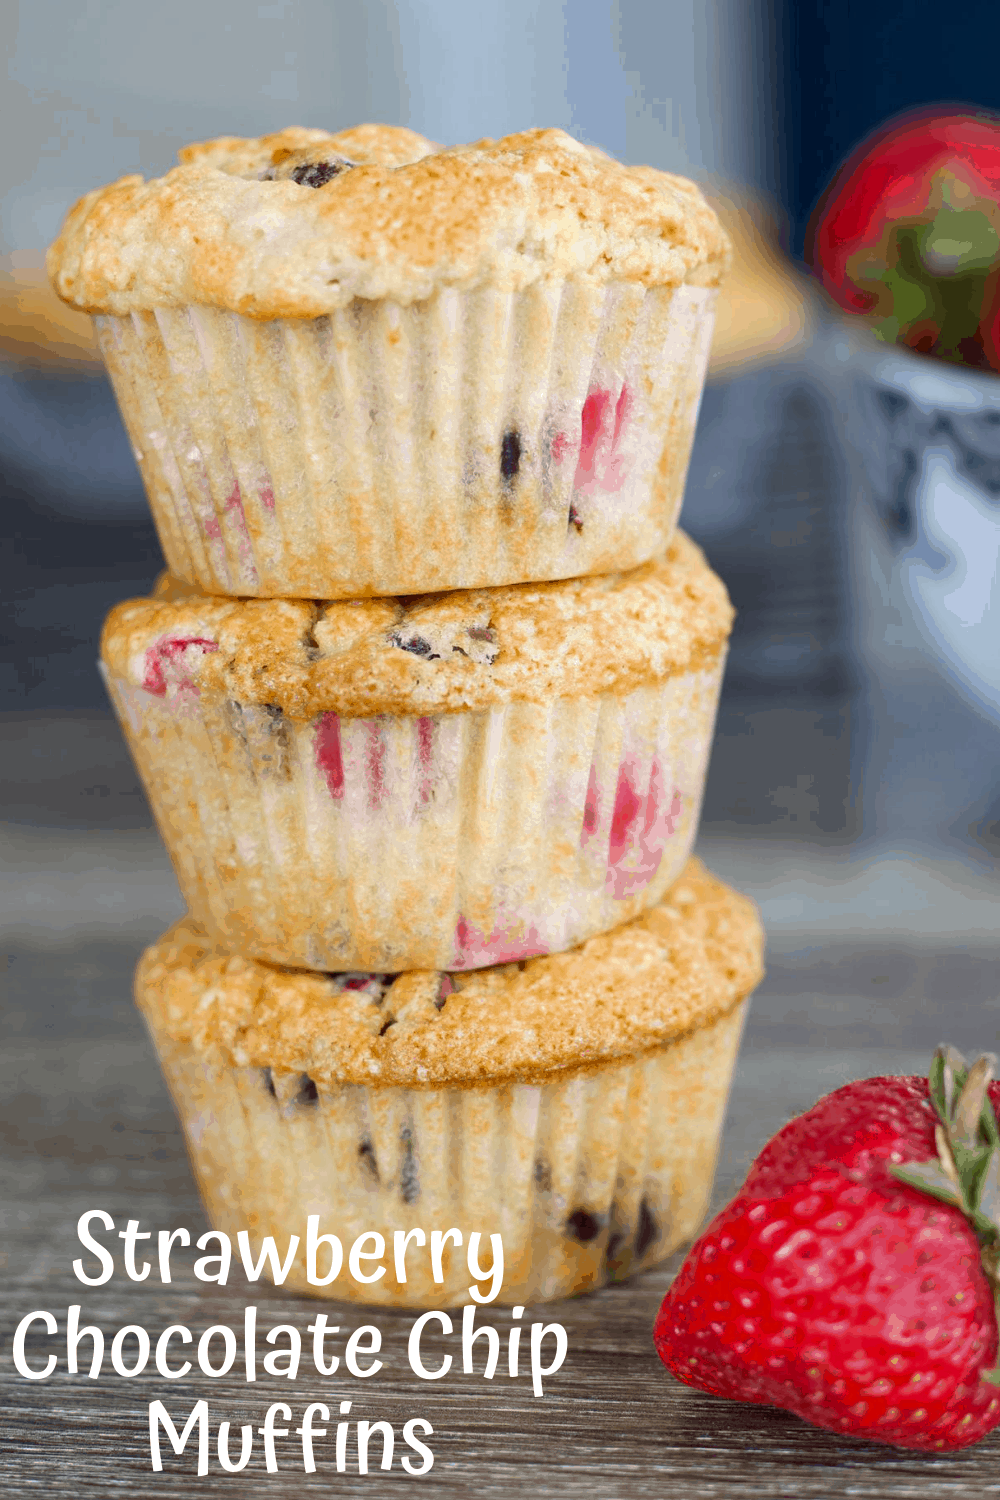 Strawberry Chocolate Chip Muffins have the perfect combination of strawberries and chocolate. Easy to make and bursting with fresh flavor. #brunch #chocolatechip #muffin #strawberry via @mindyscookingobsession